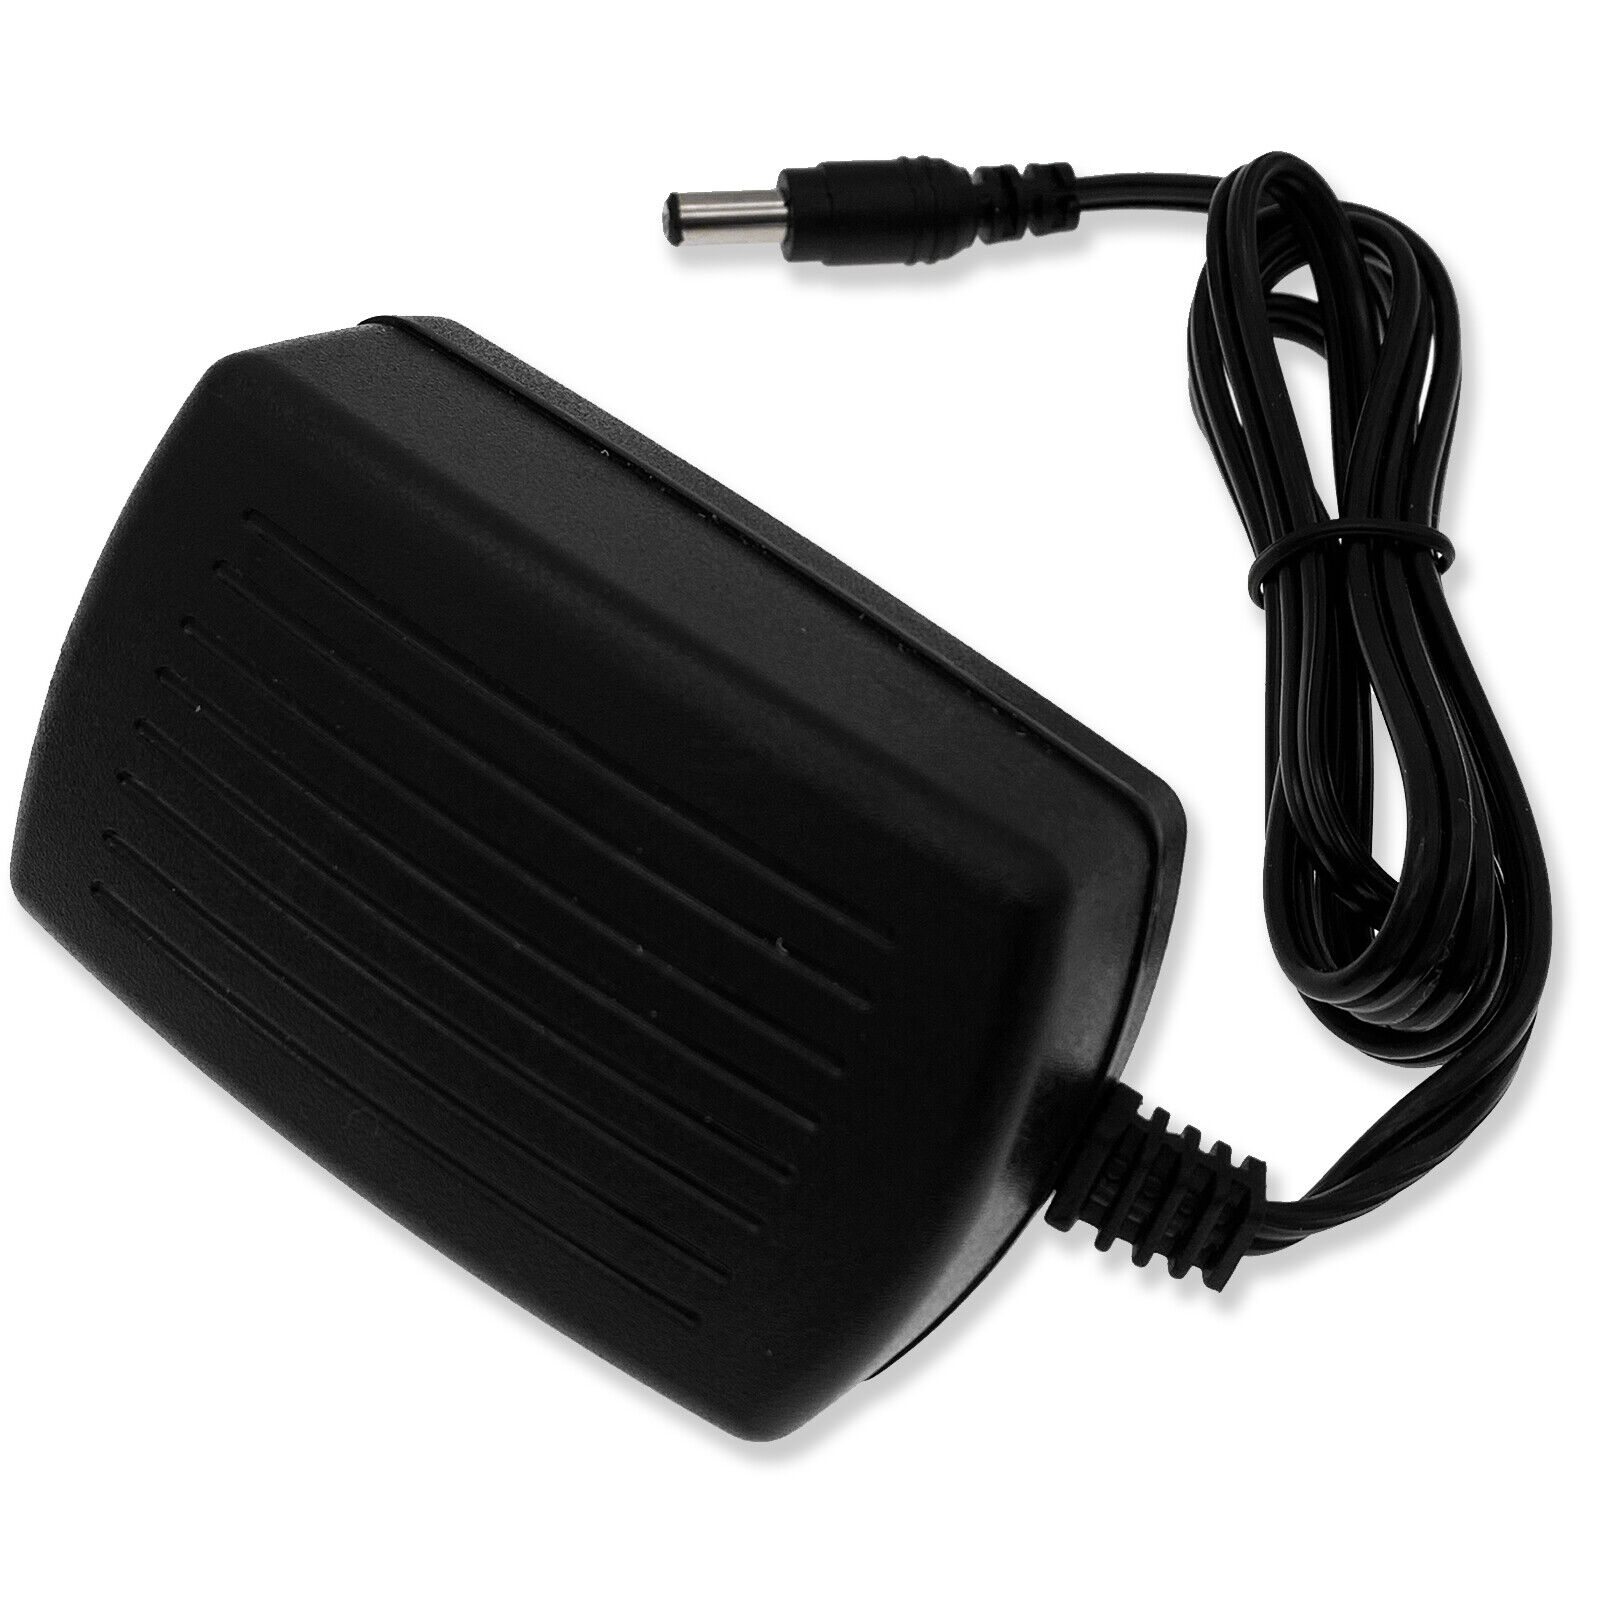 AC Adapter For Getac S410 Semi-Rugged Laptop 65W Charger Power Supply Cord Cable Brand Unbranded Color Black Compati